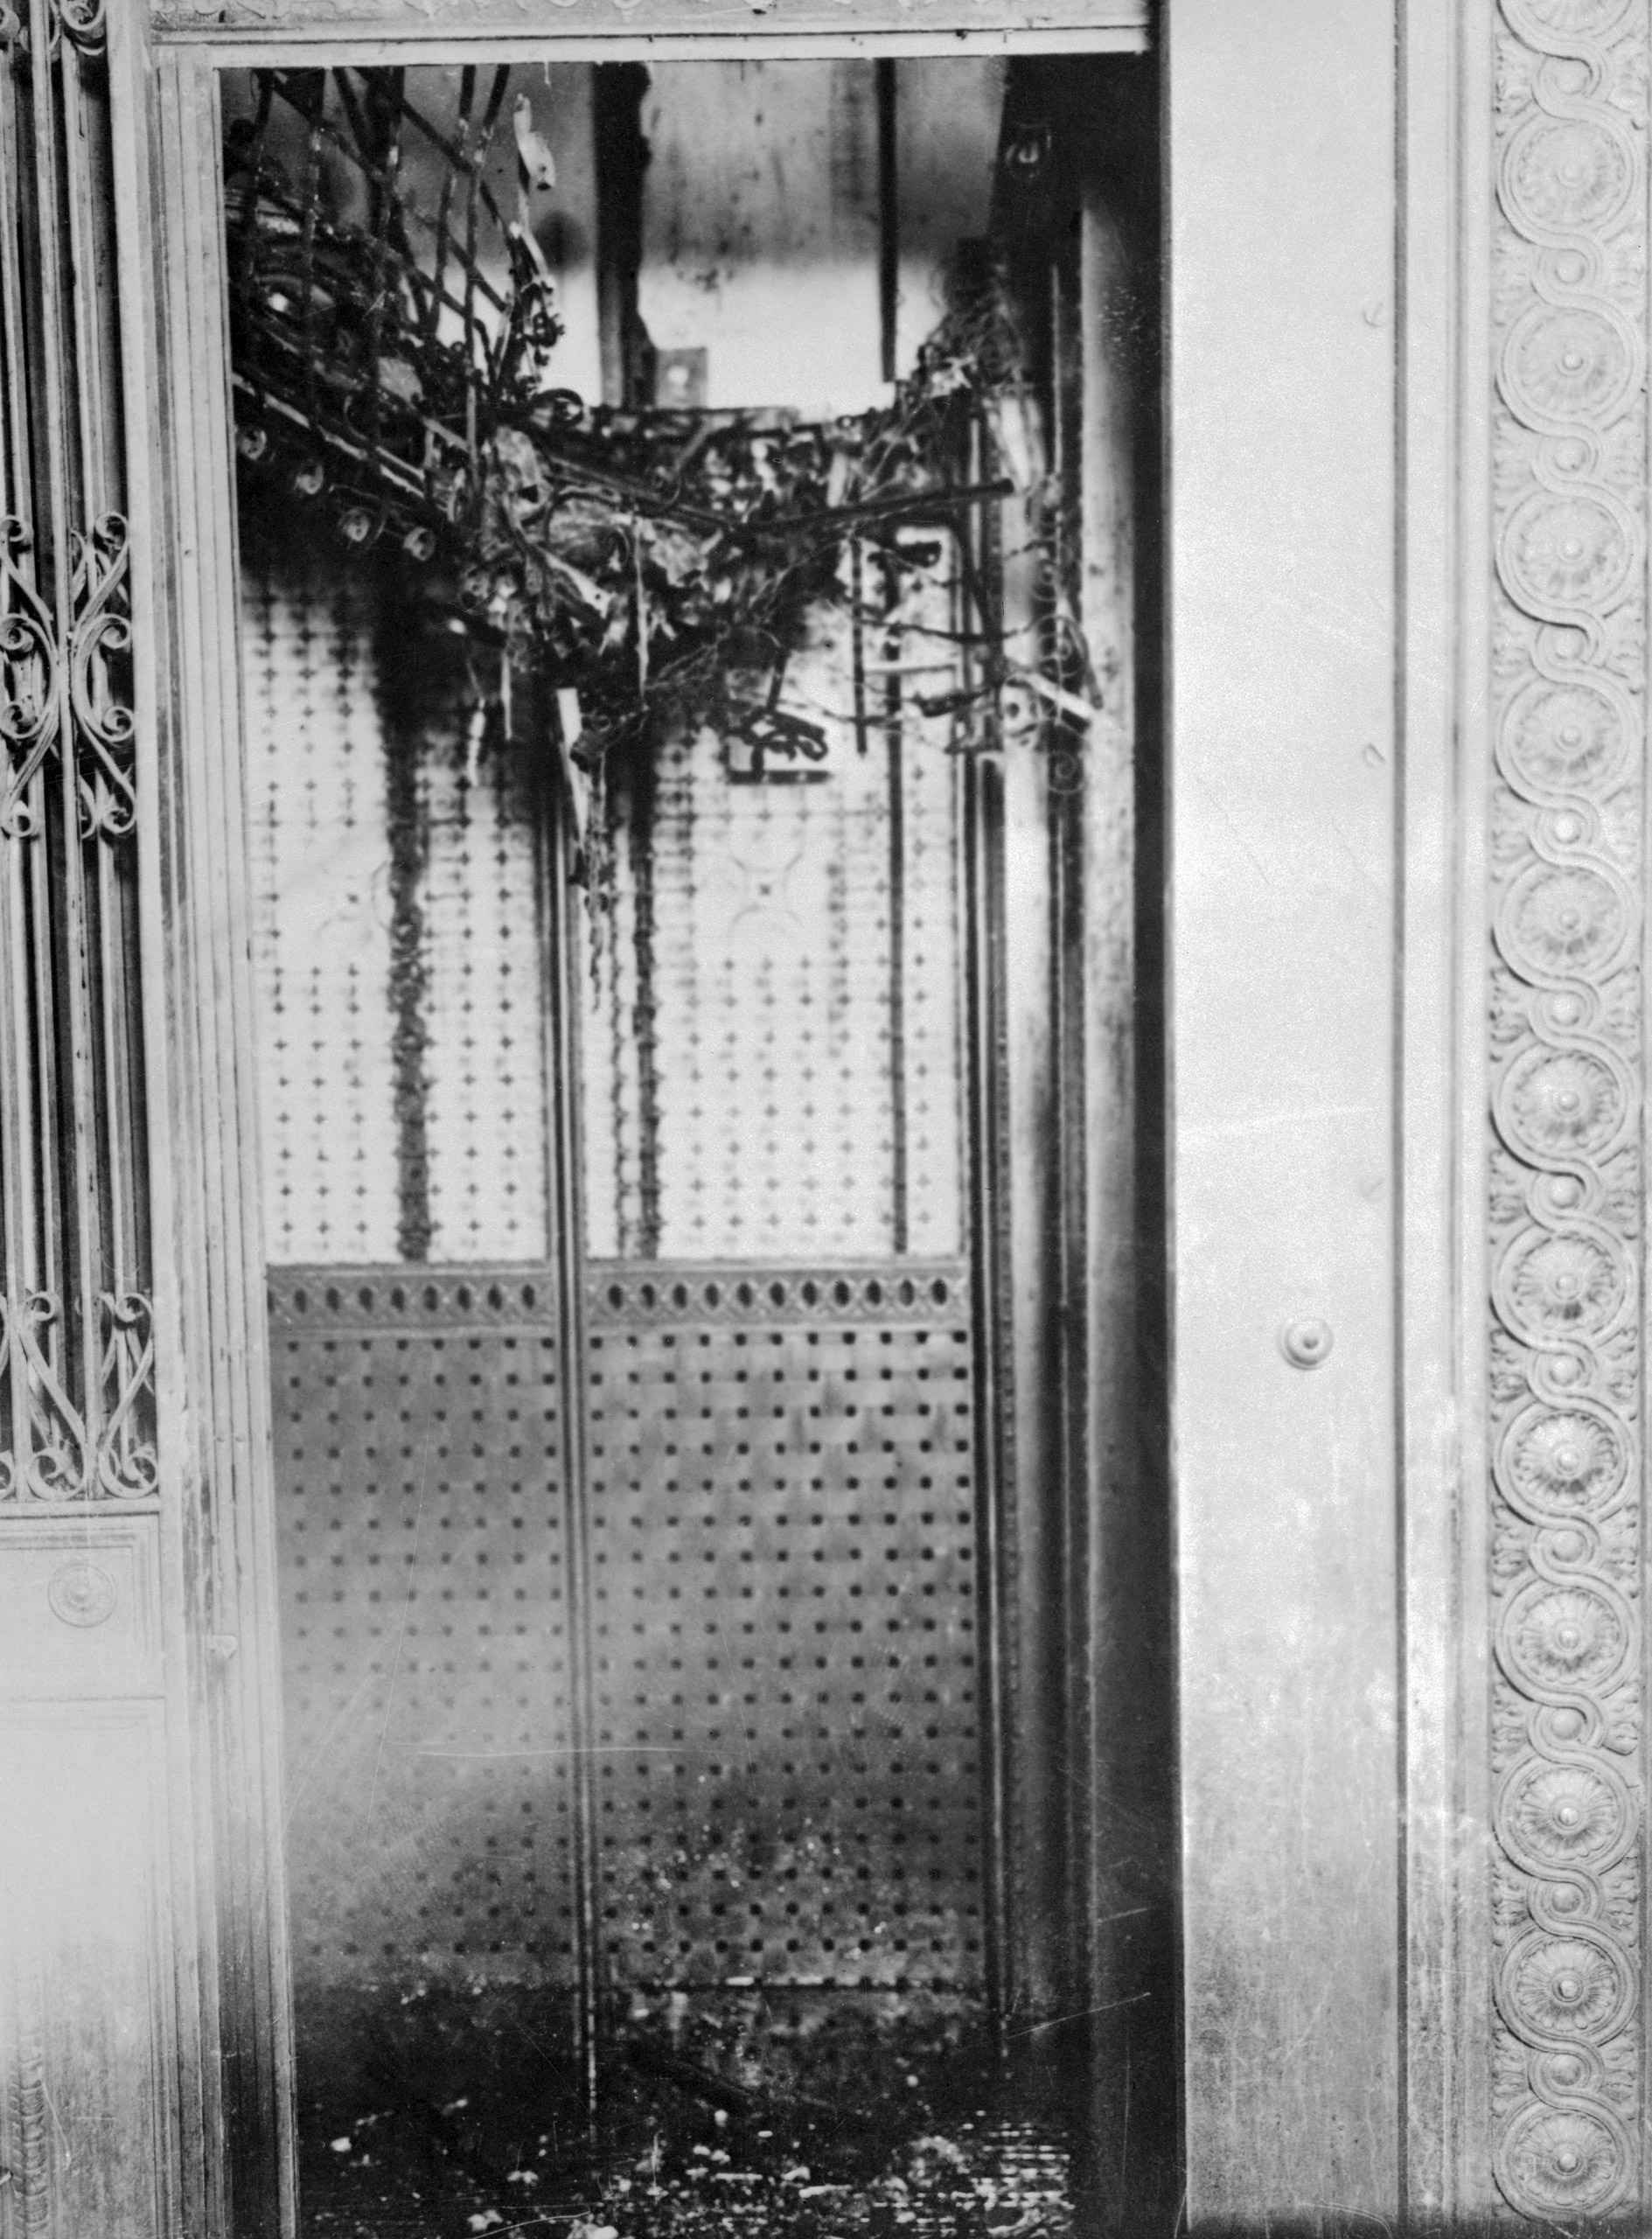 Charred remains of elevator in Asch Building. From the Triangle Shirtwaist Company fire on March 25, 1911.